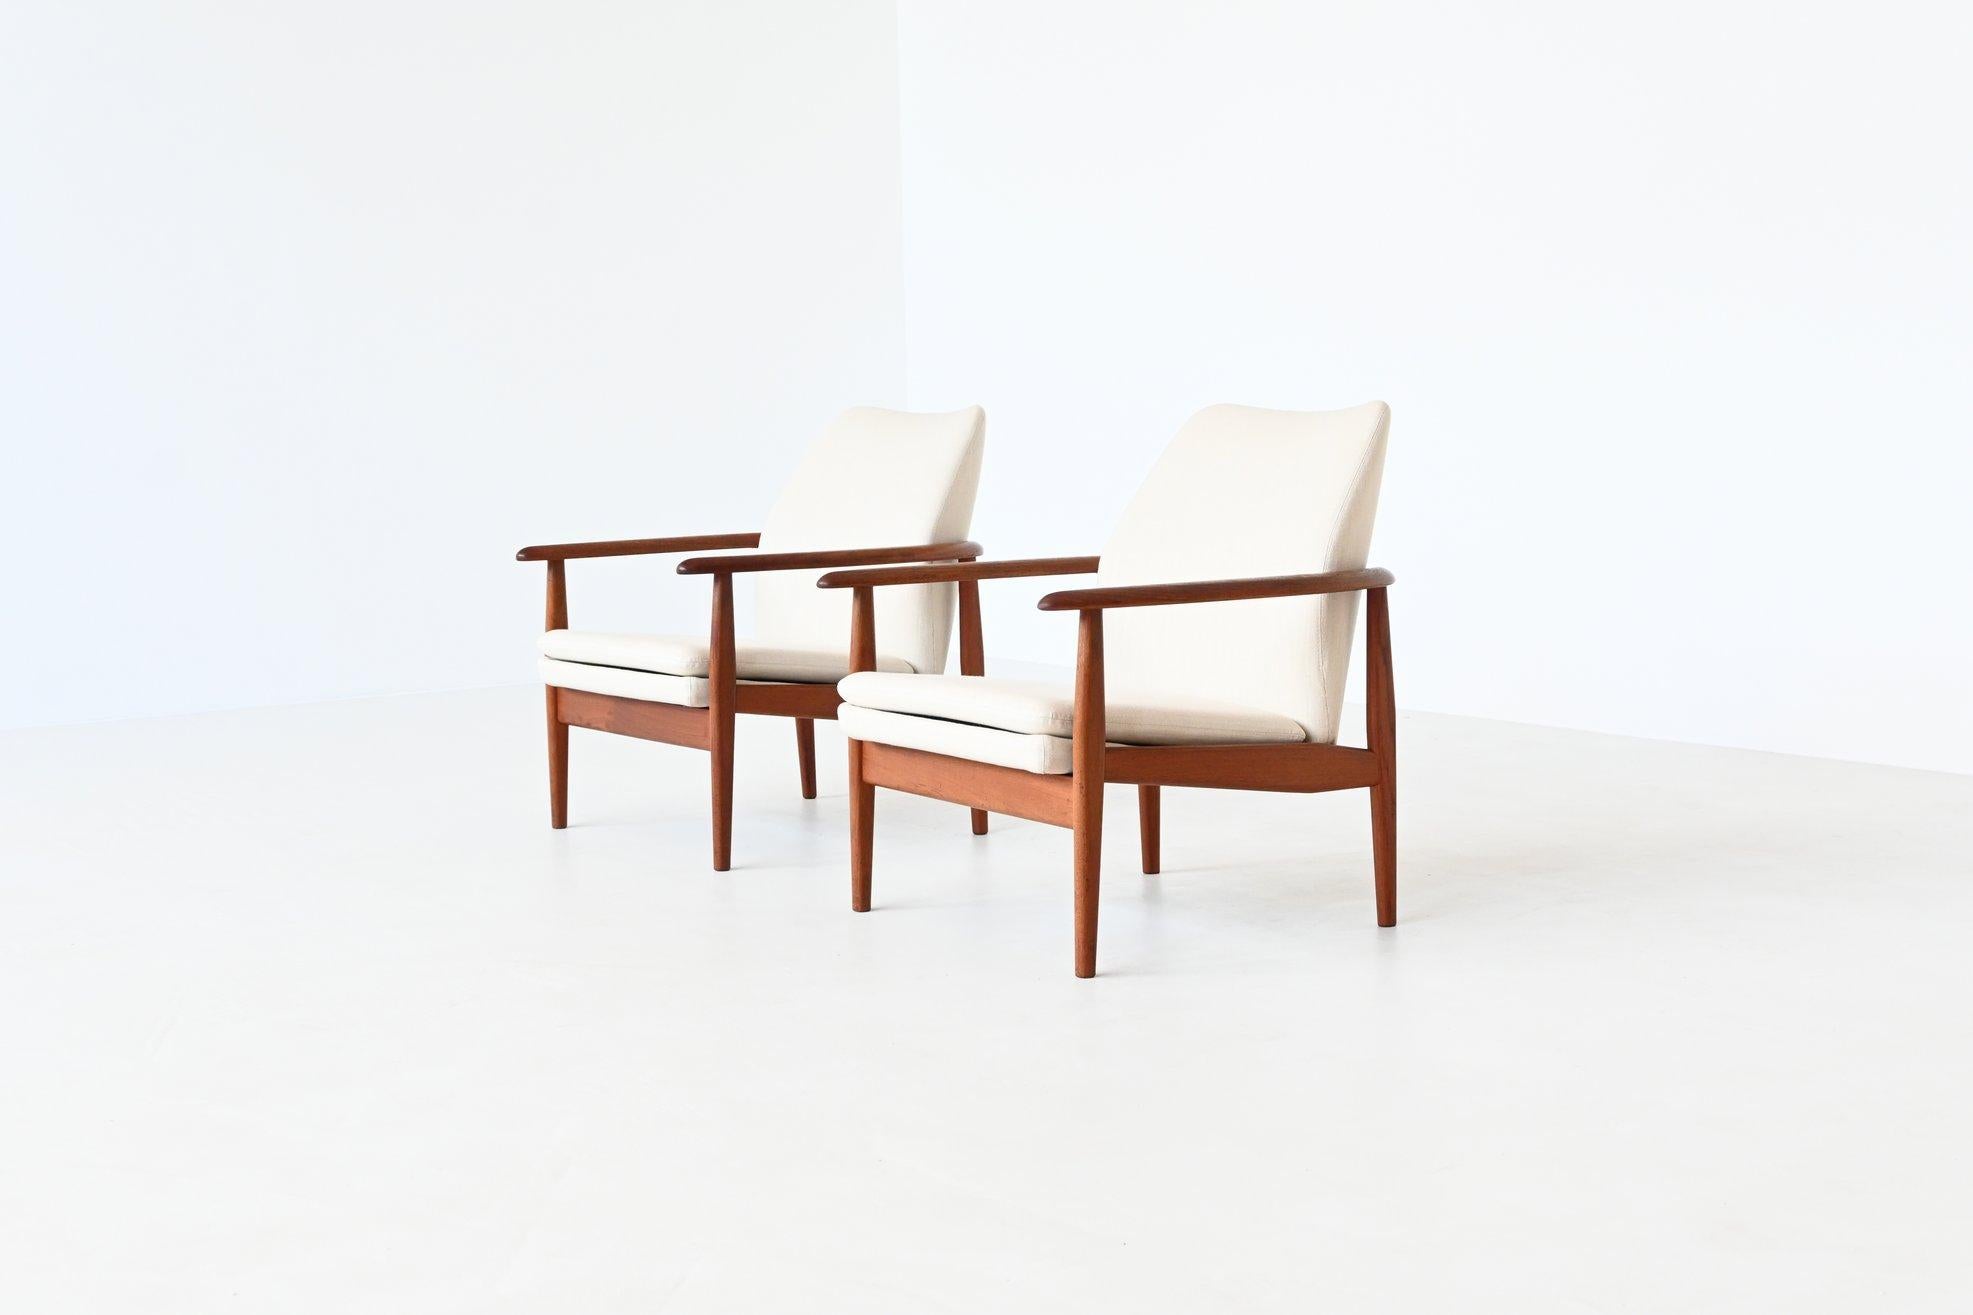 Beautiful shaped pair of lounge chairs by unknown designer or manufacturer, Denmark 1960. These sculptural chairs feature a solid teak wooden frame and the shells and cushions are upholstered with off-white linen fabric. Typical example of high